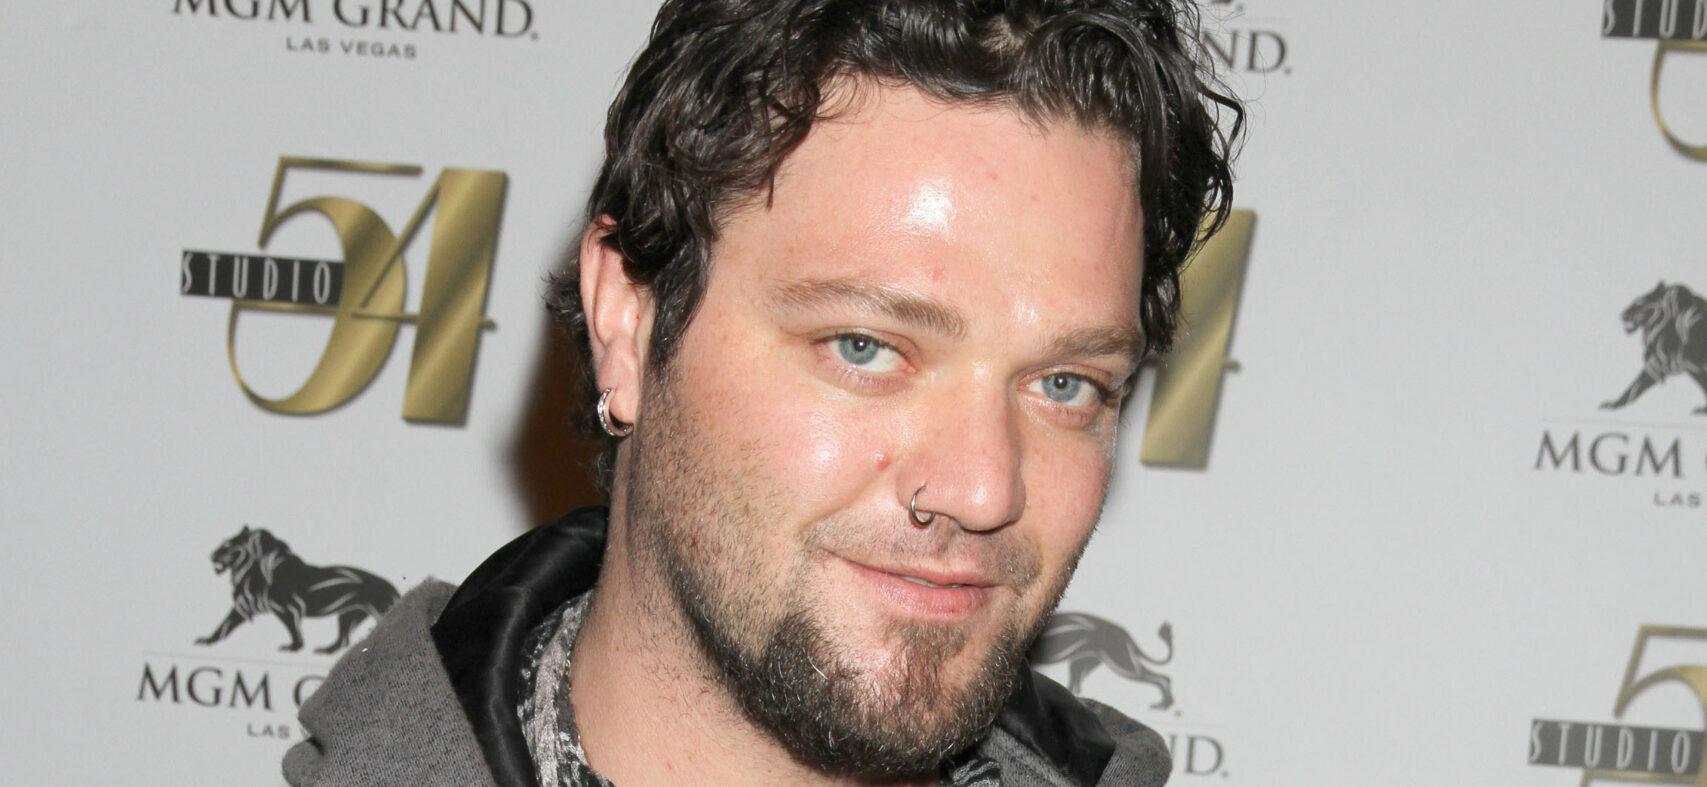 Bam Margera Posts Bail After Getting Arrested & Detained For Allegedly Kicking Girlfriend